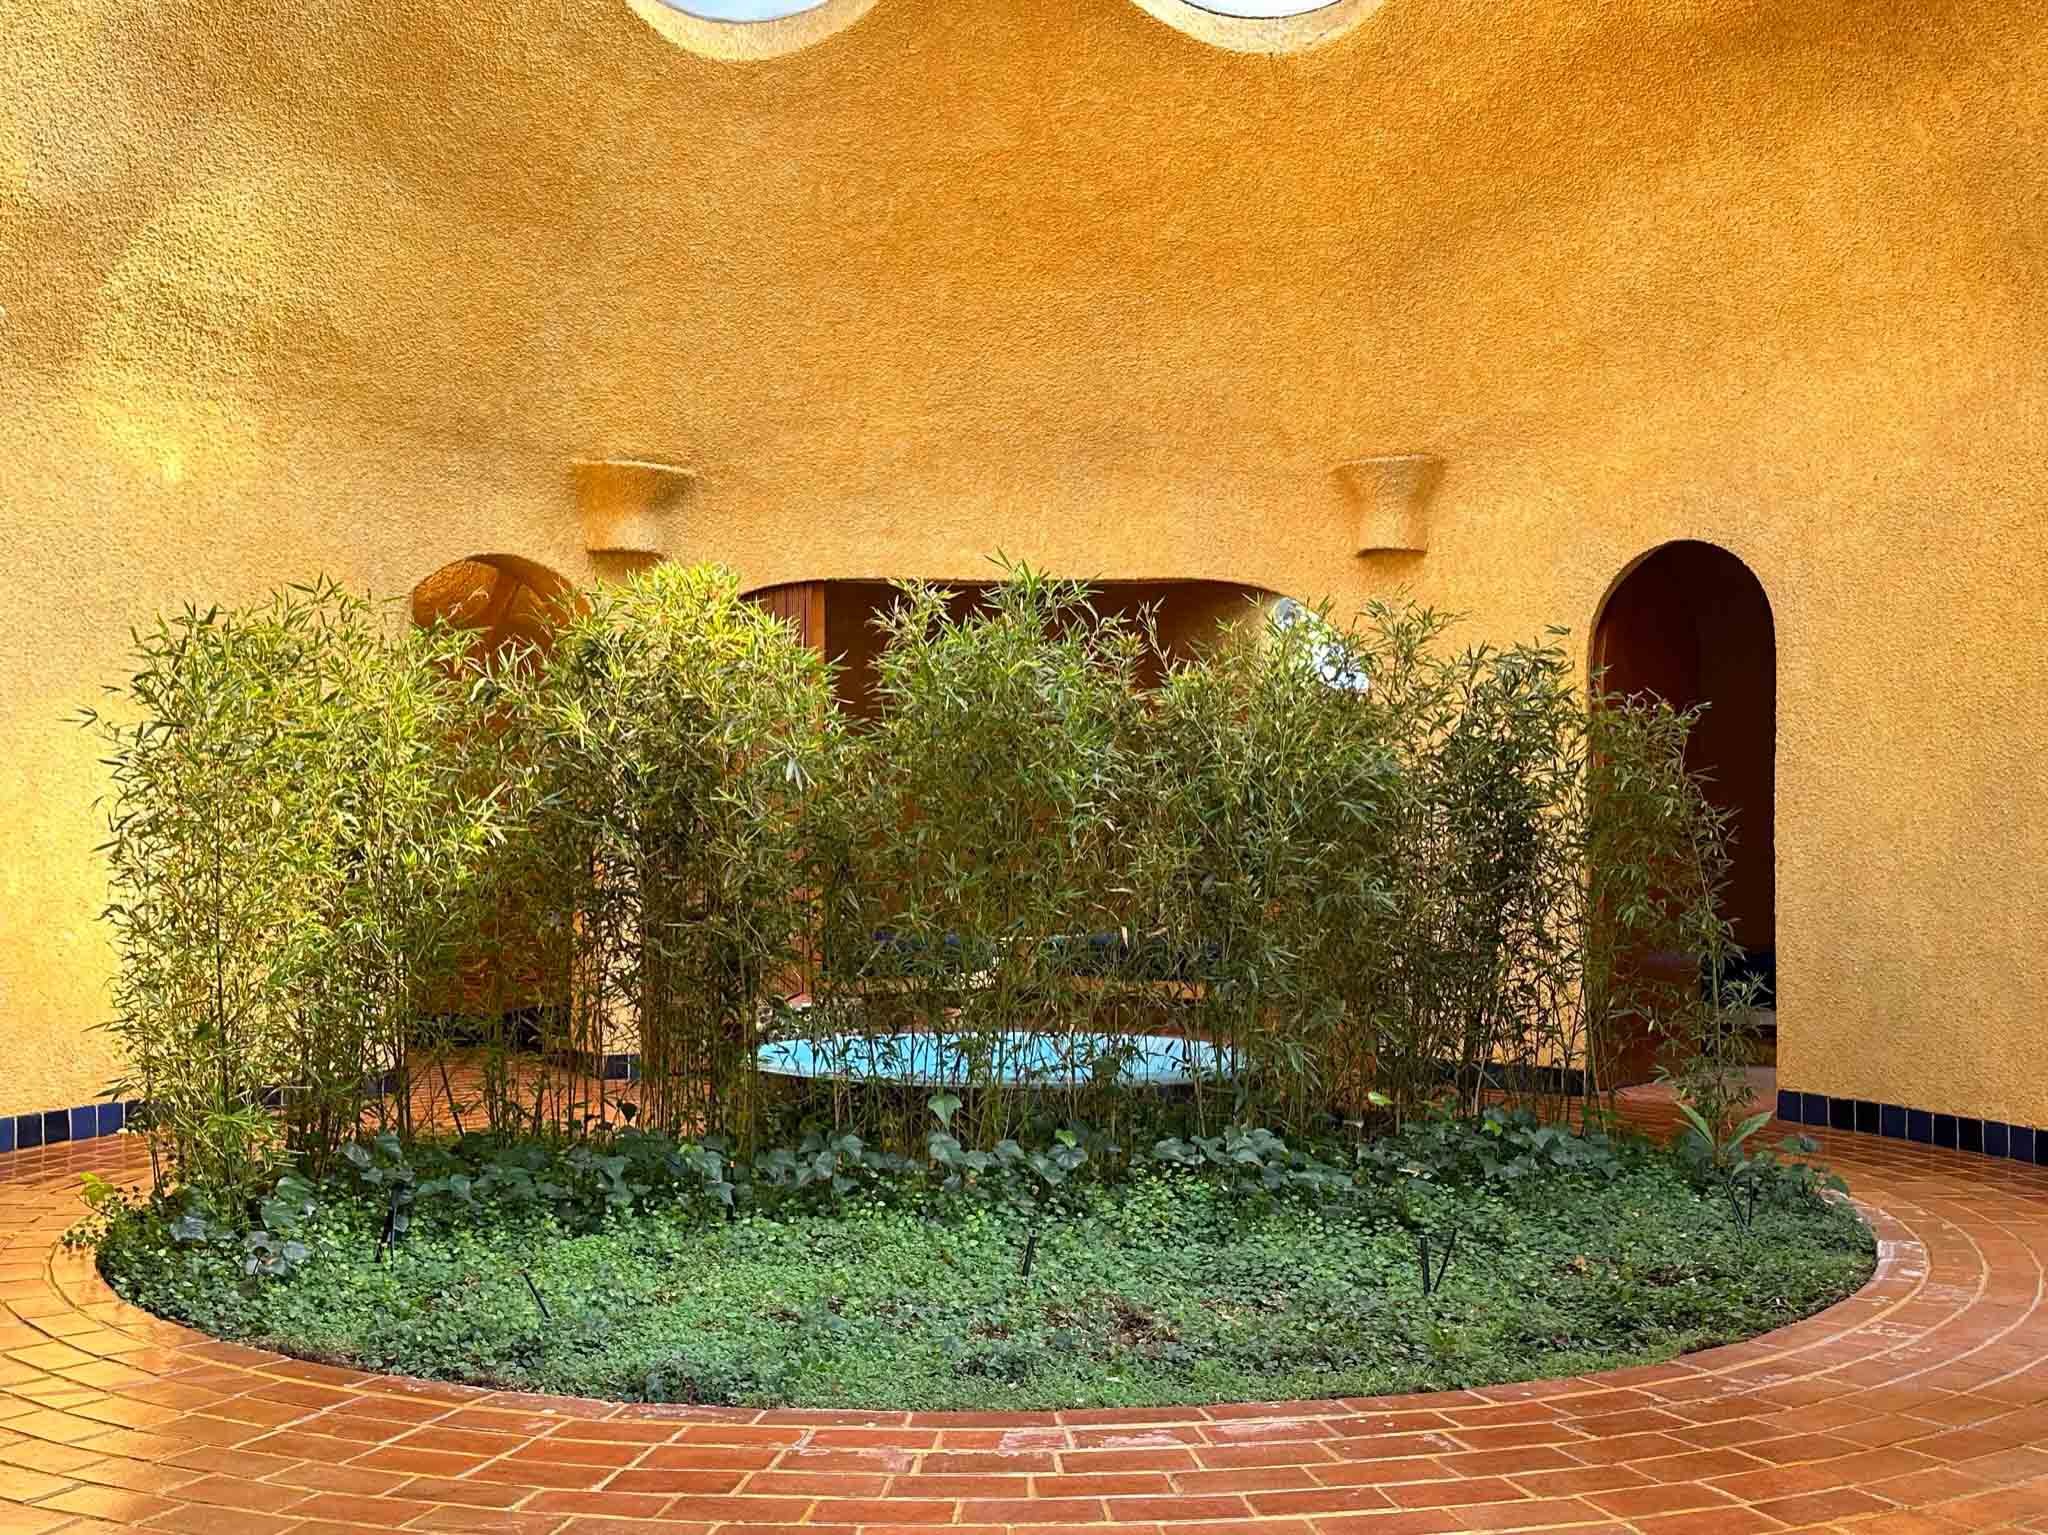 Interior view of a residence at Conjunto Satelite, featuring a grove of trees around a jacuzzi